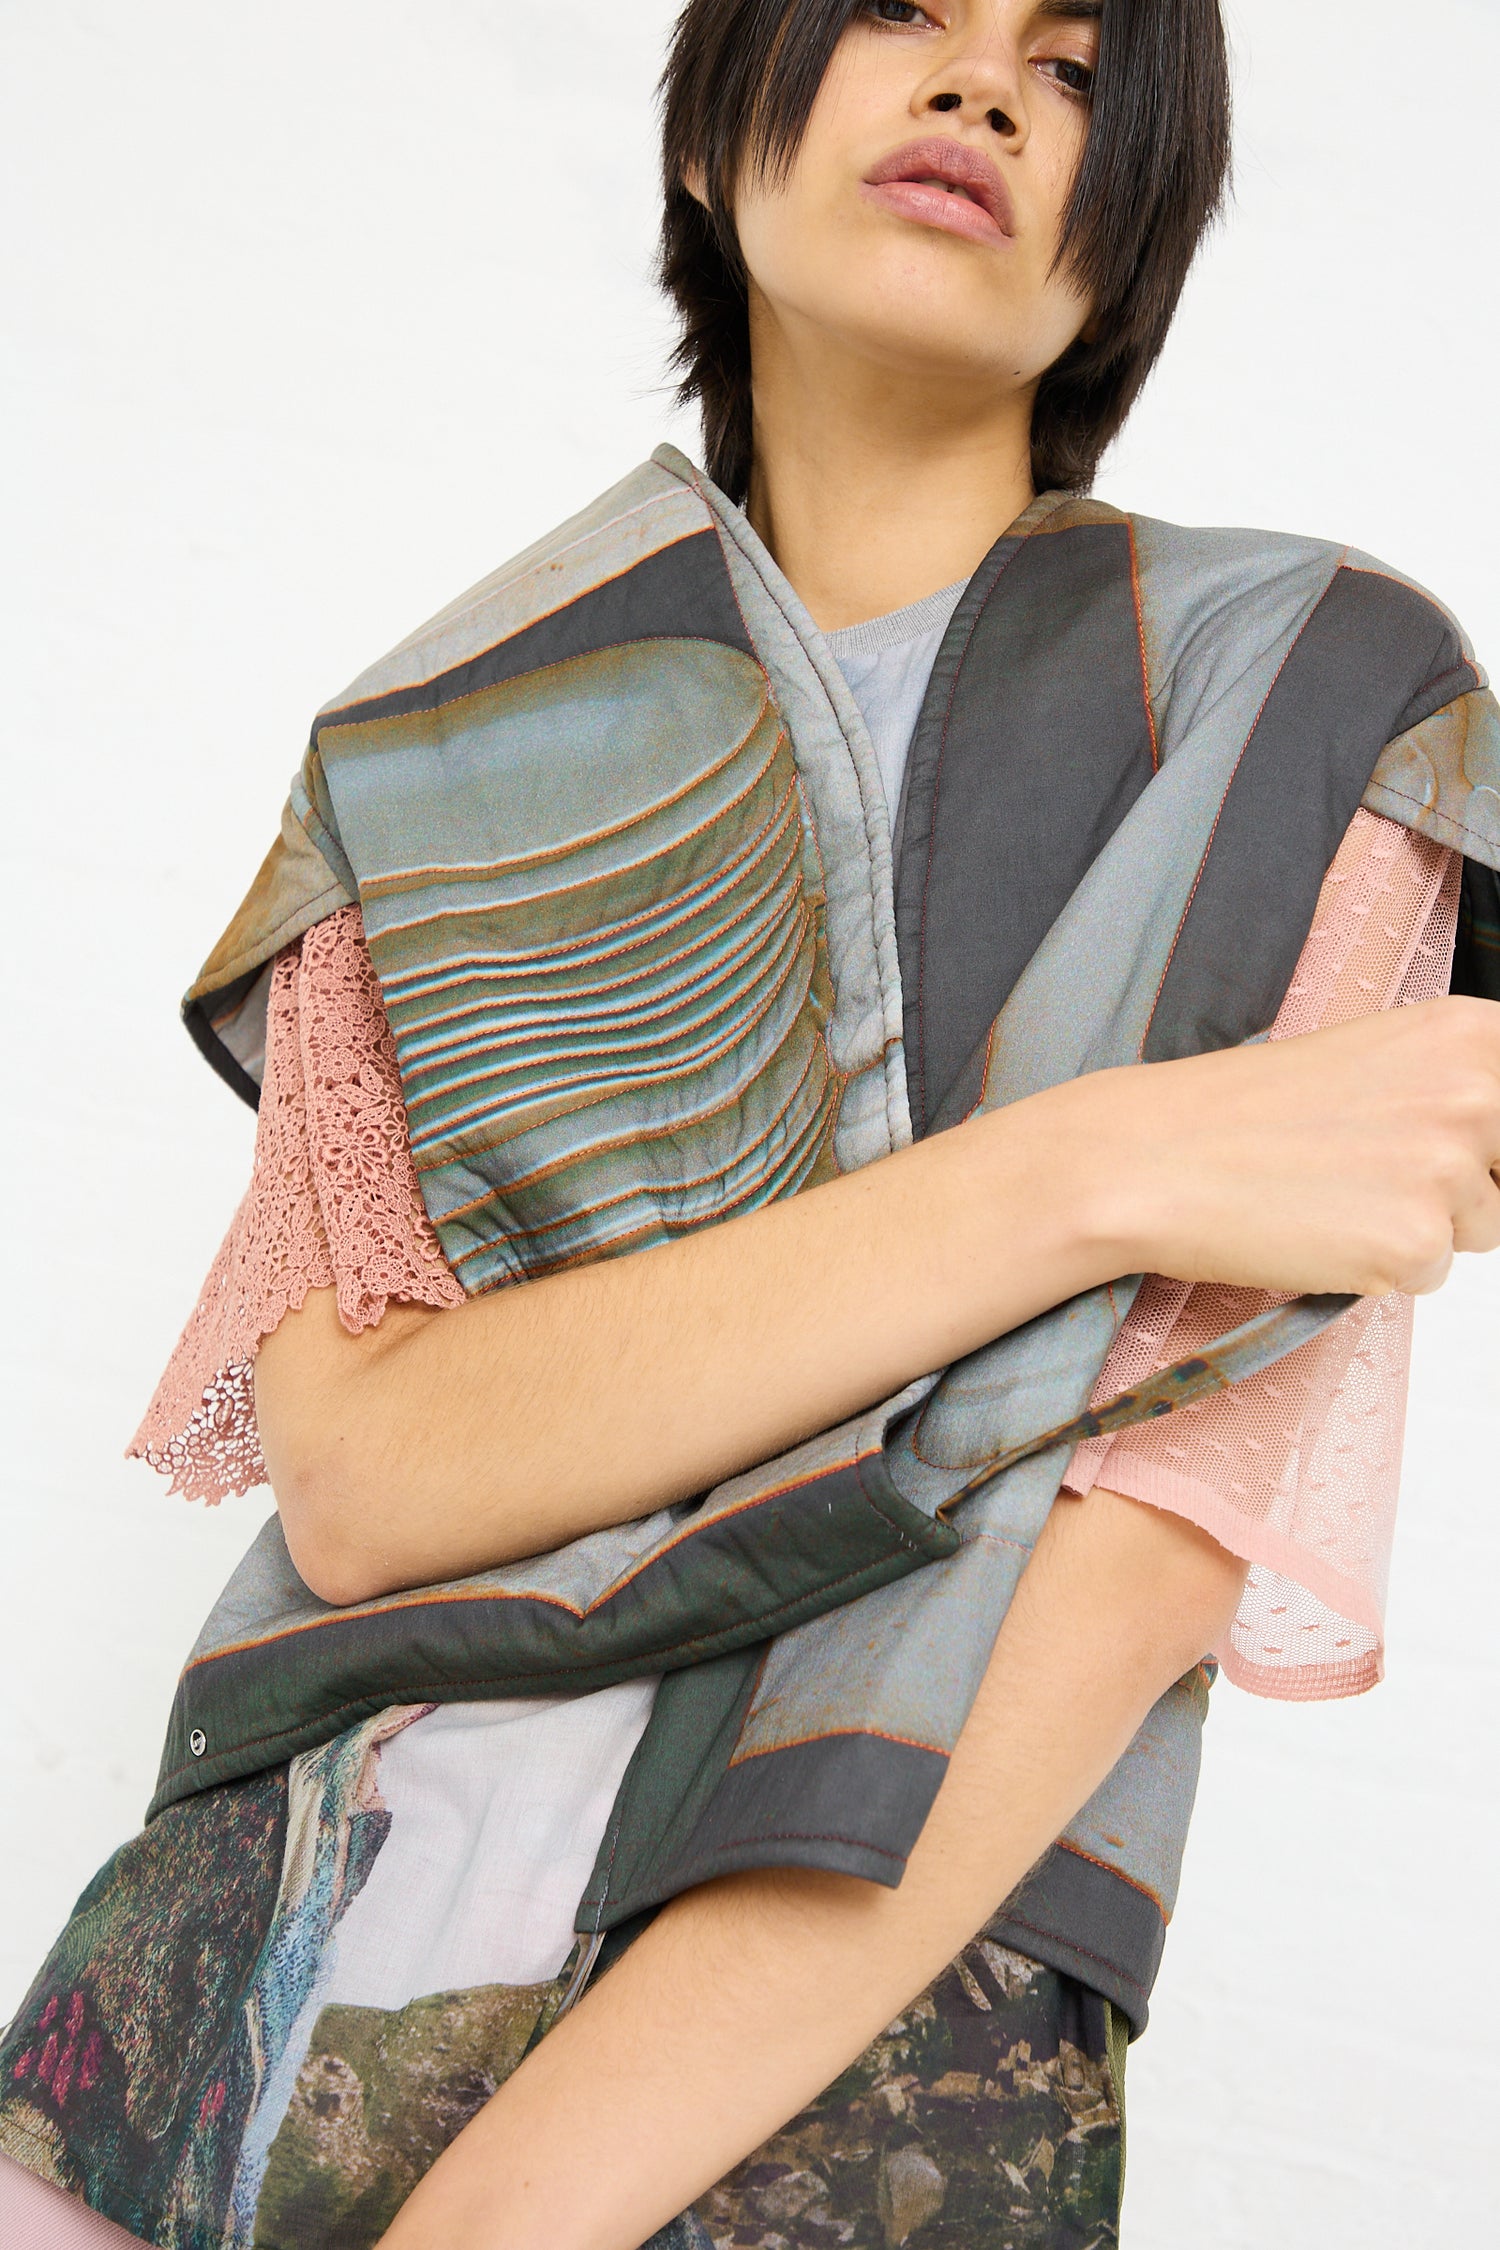 A person in a layered outfit featuring a Bless Cotton No. 77 Summer Living Vest in Print with textured fabrics against a white background.